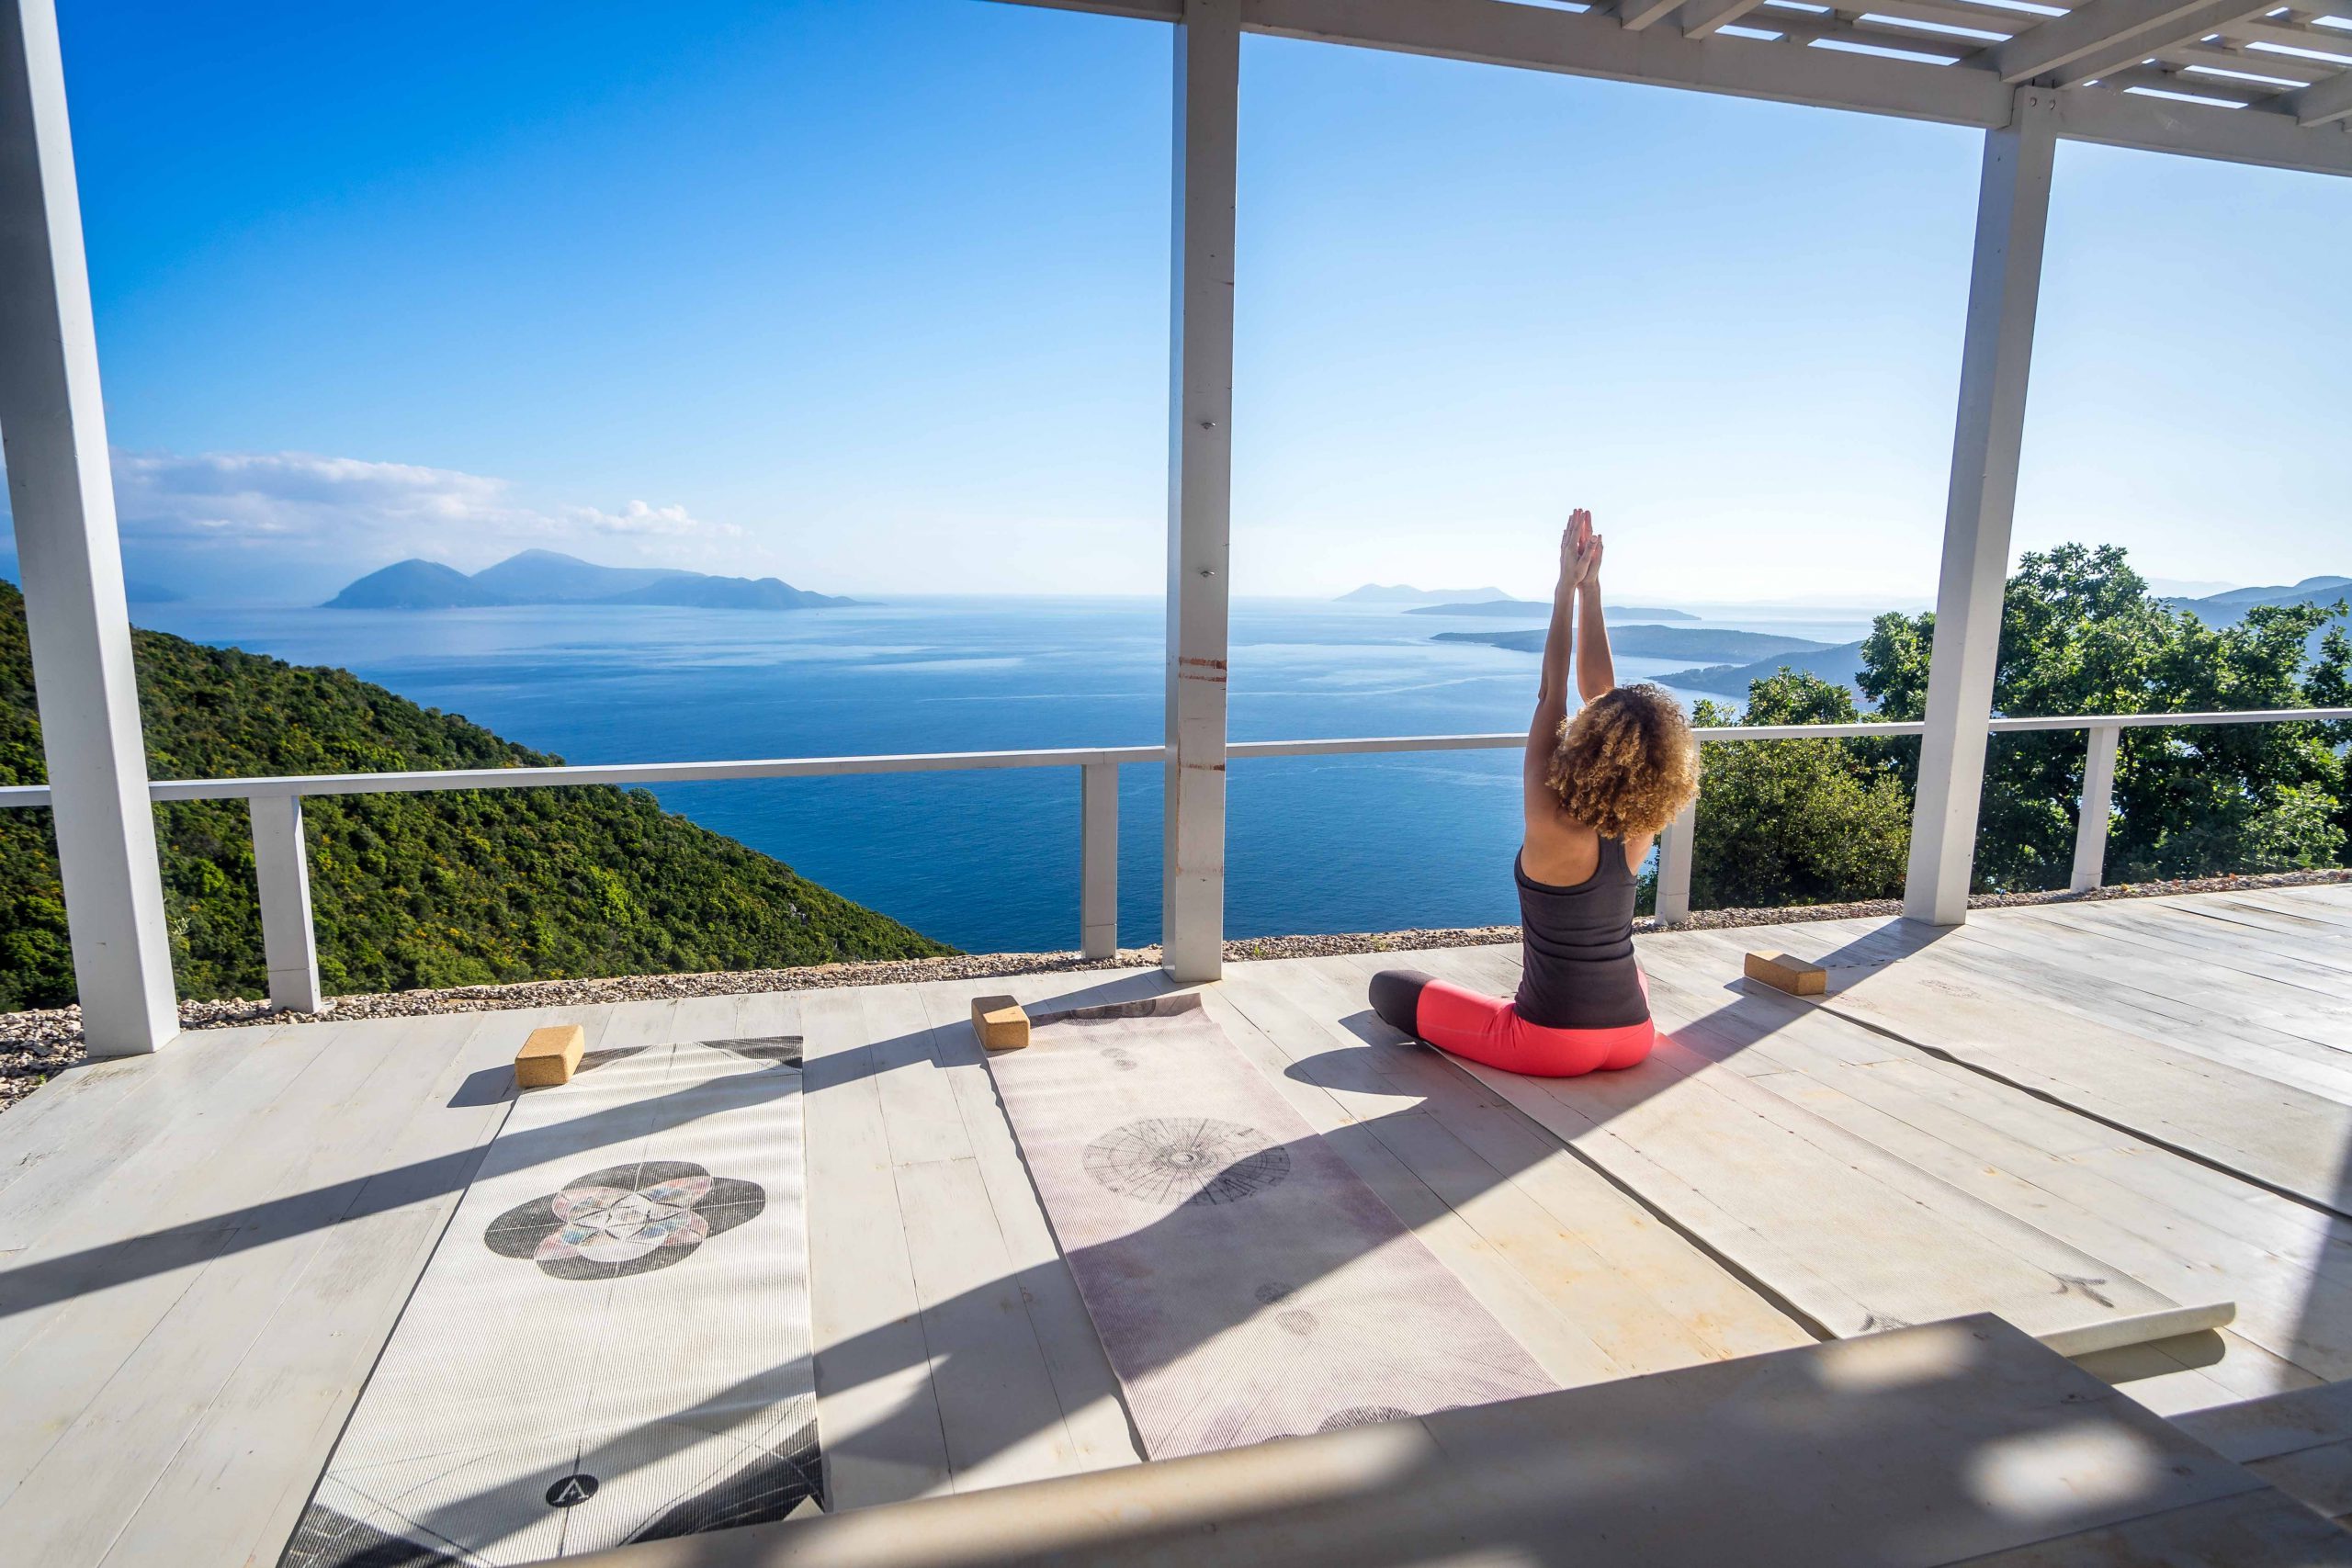 The view from the Yoga Studio in Lefkada